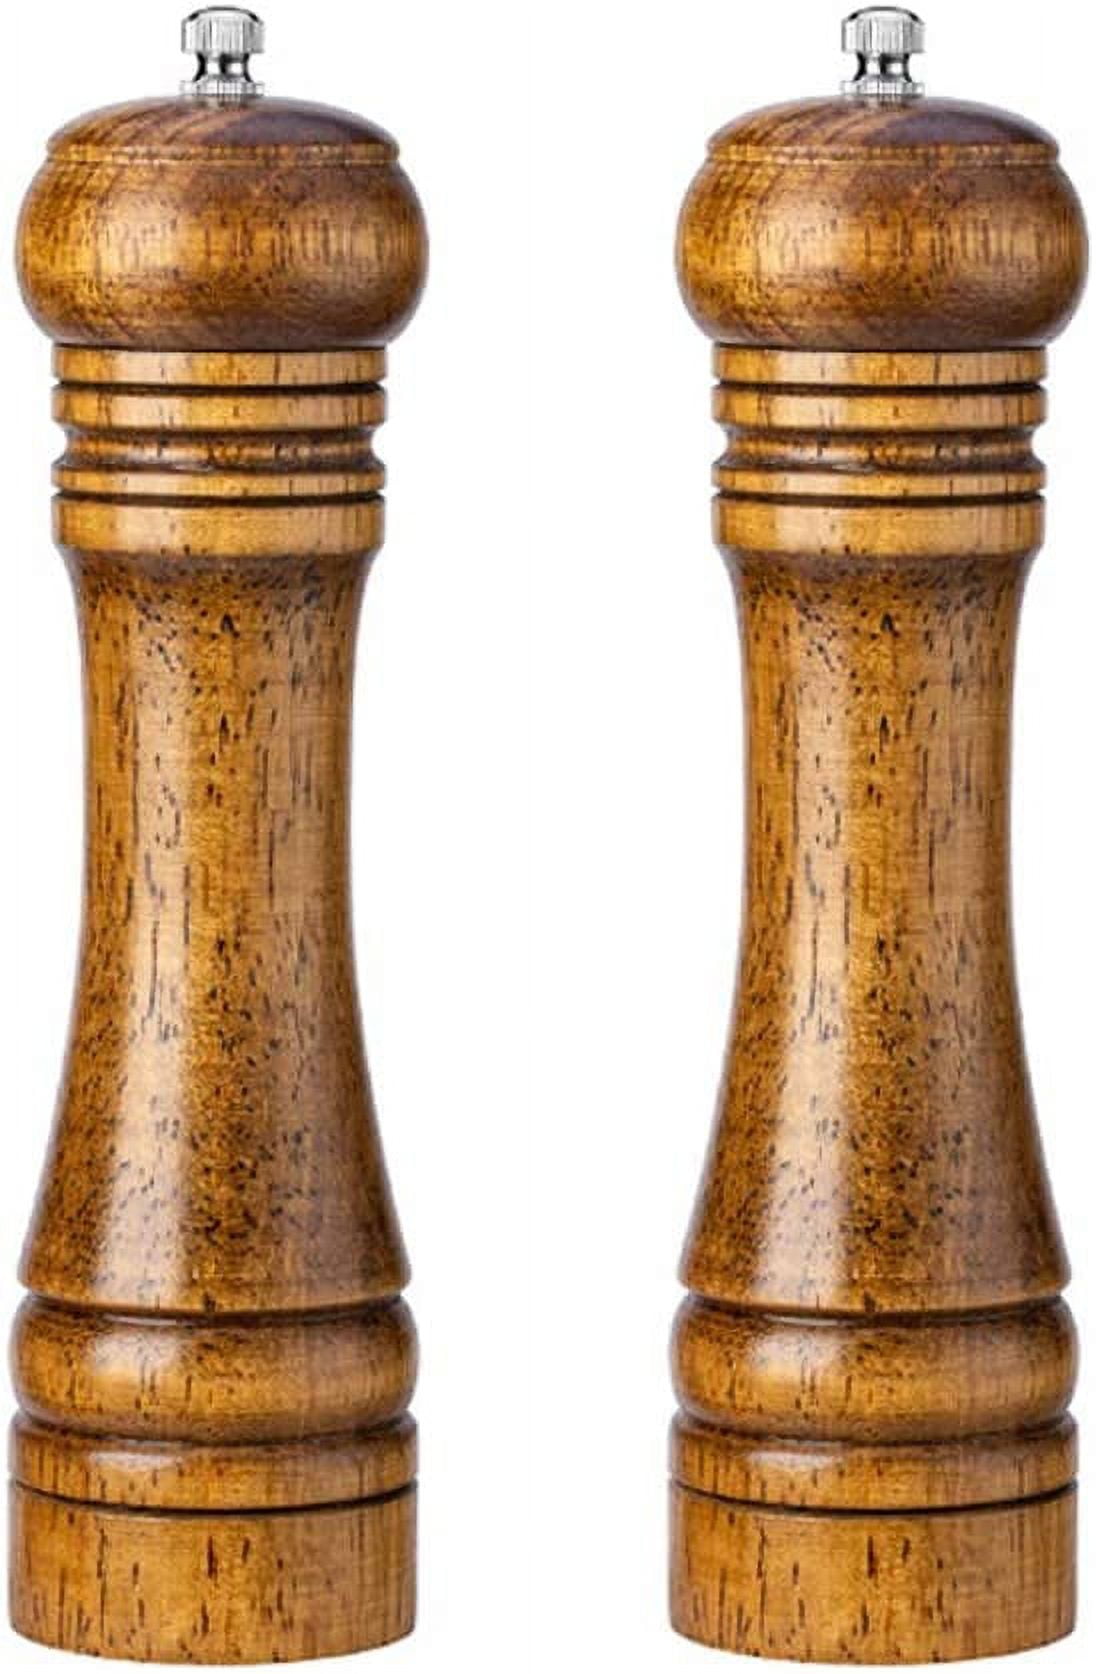 Zettai Wooden Salt & Pepper Grinder Set (Pack of 2), 8 inches, Wooden Salt  & Pepper Mill Set For Cooking, Dining, Home Decor. Including Cleaning